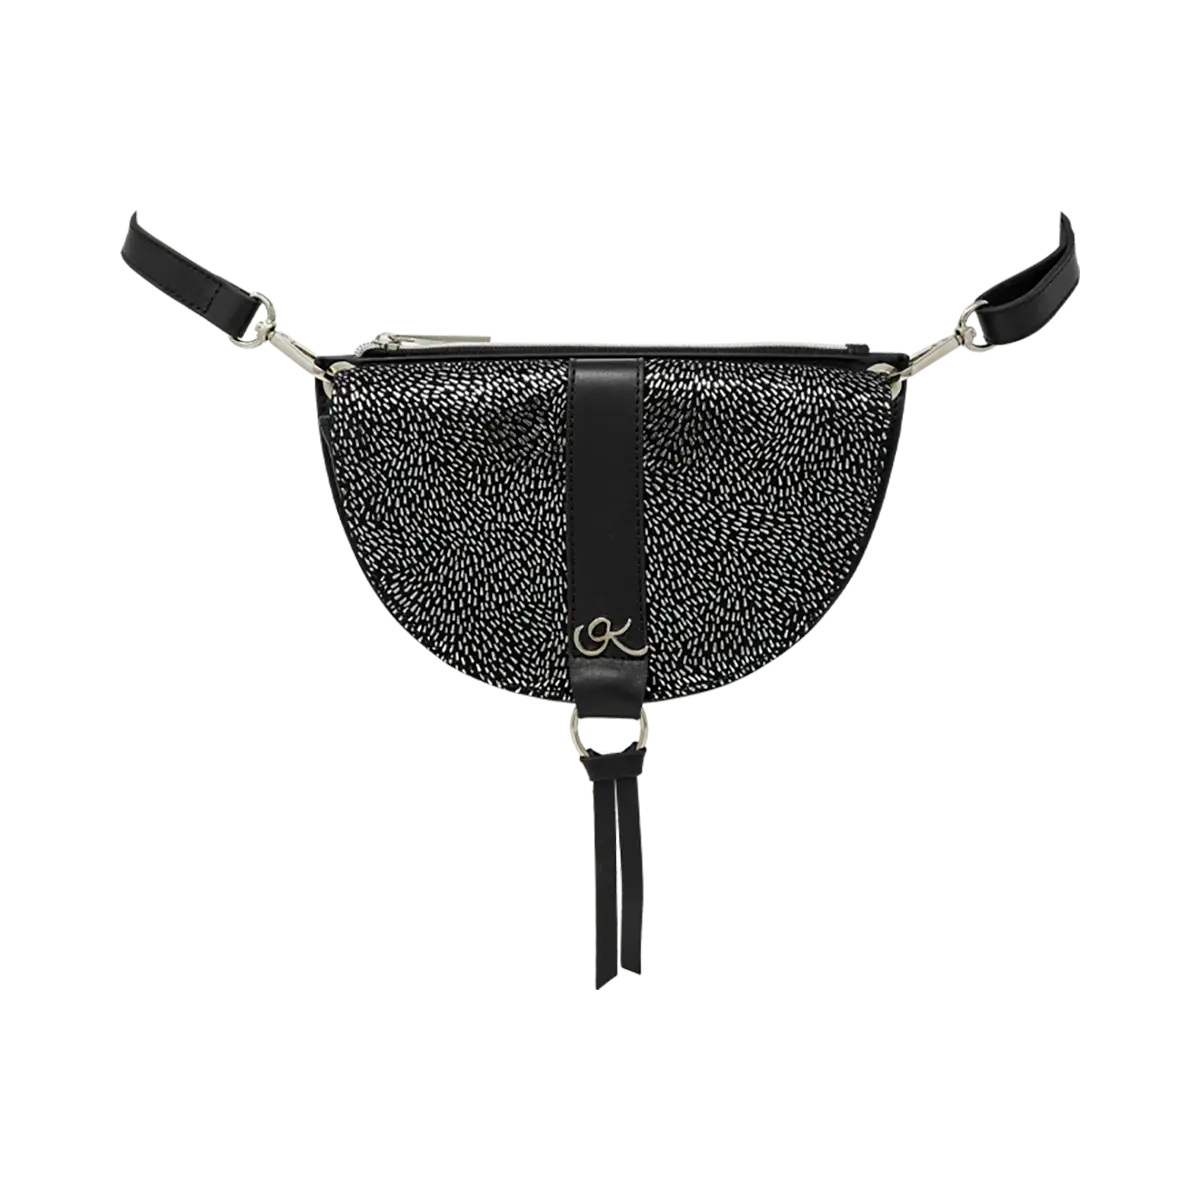 black silver stripe print leather crossbody bag and fanny pack. Accessory for women in San Diego, CA.